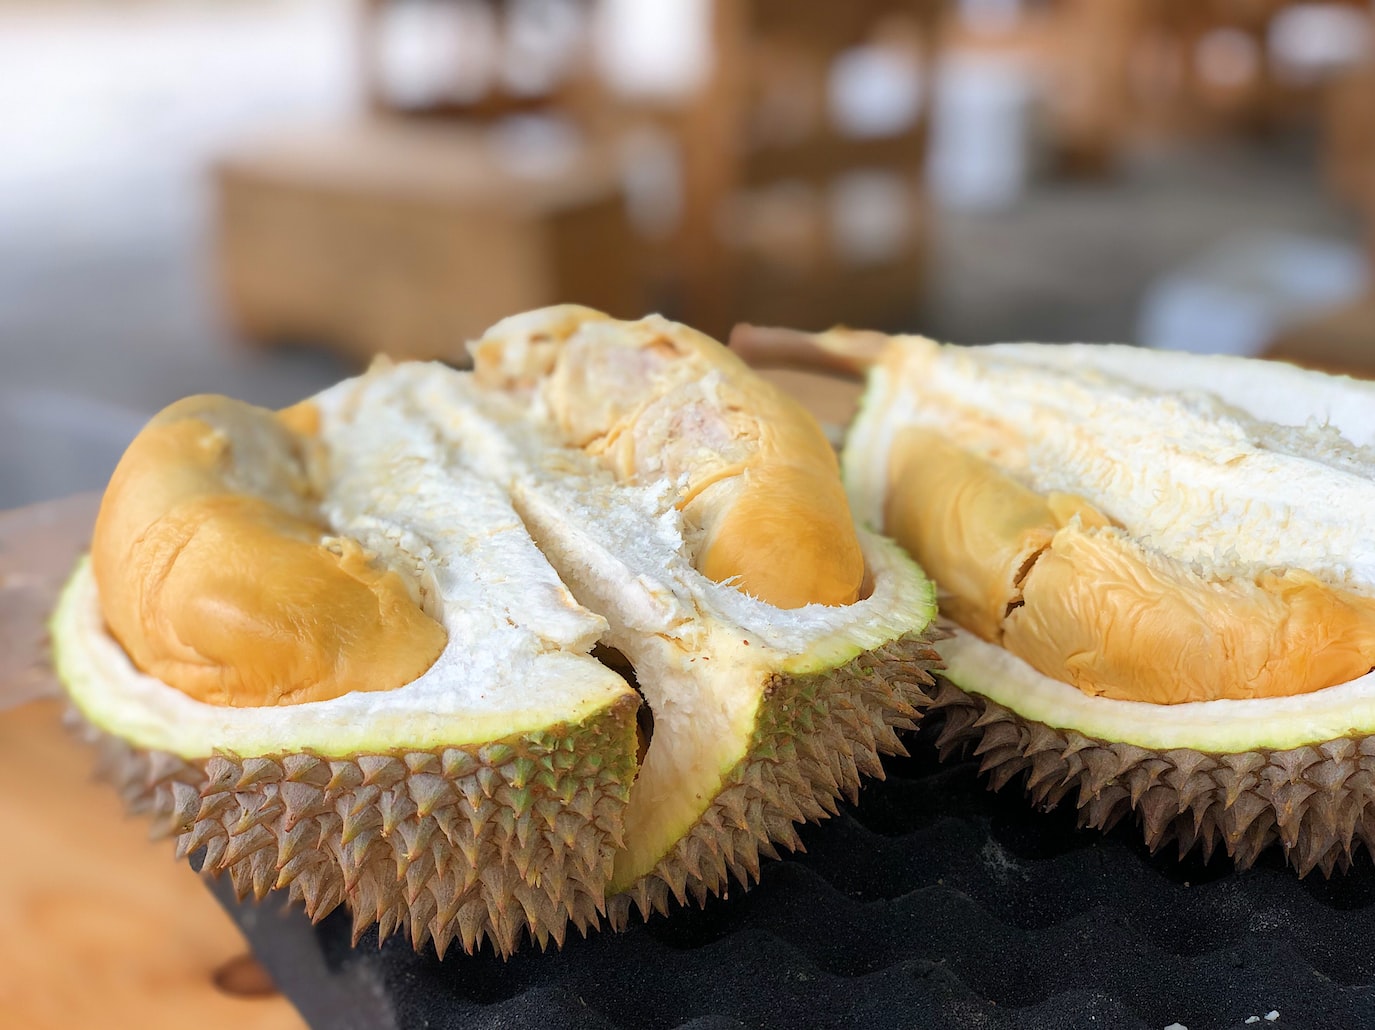 Durian - There are many types